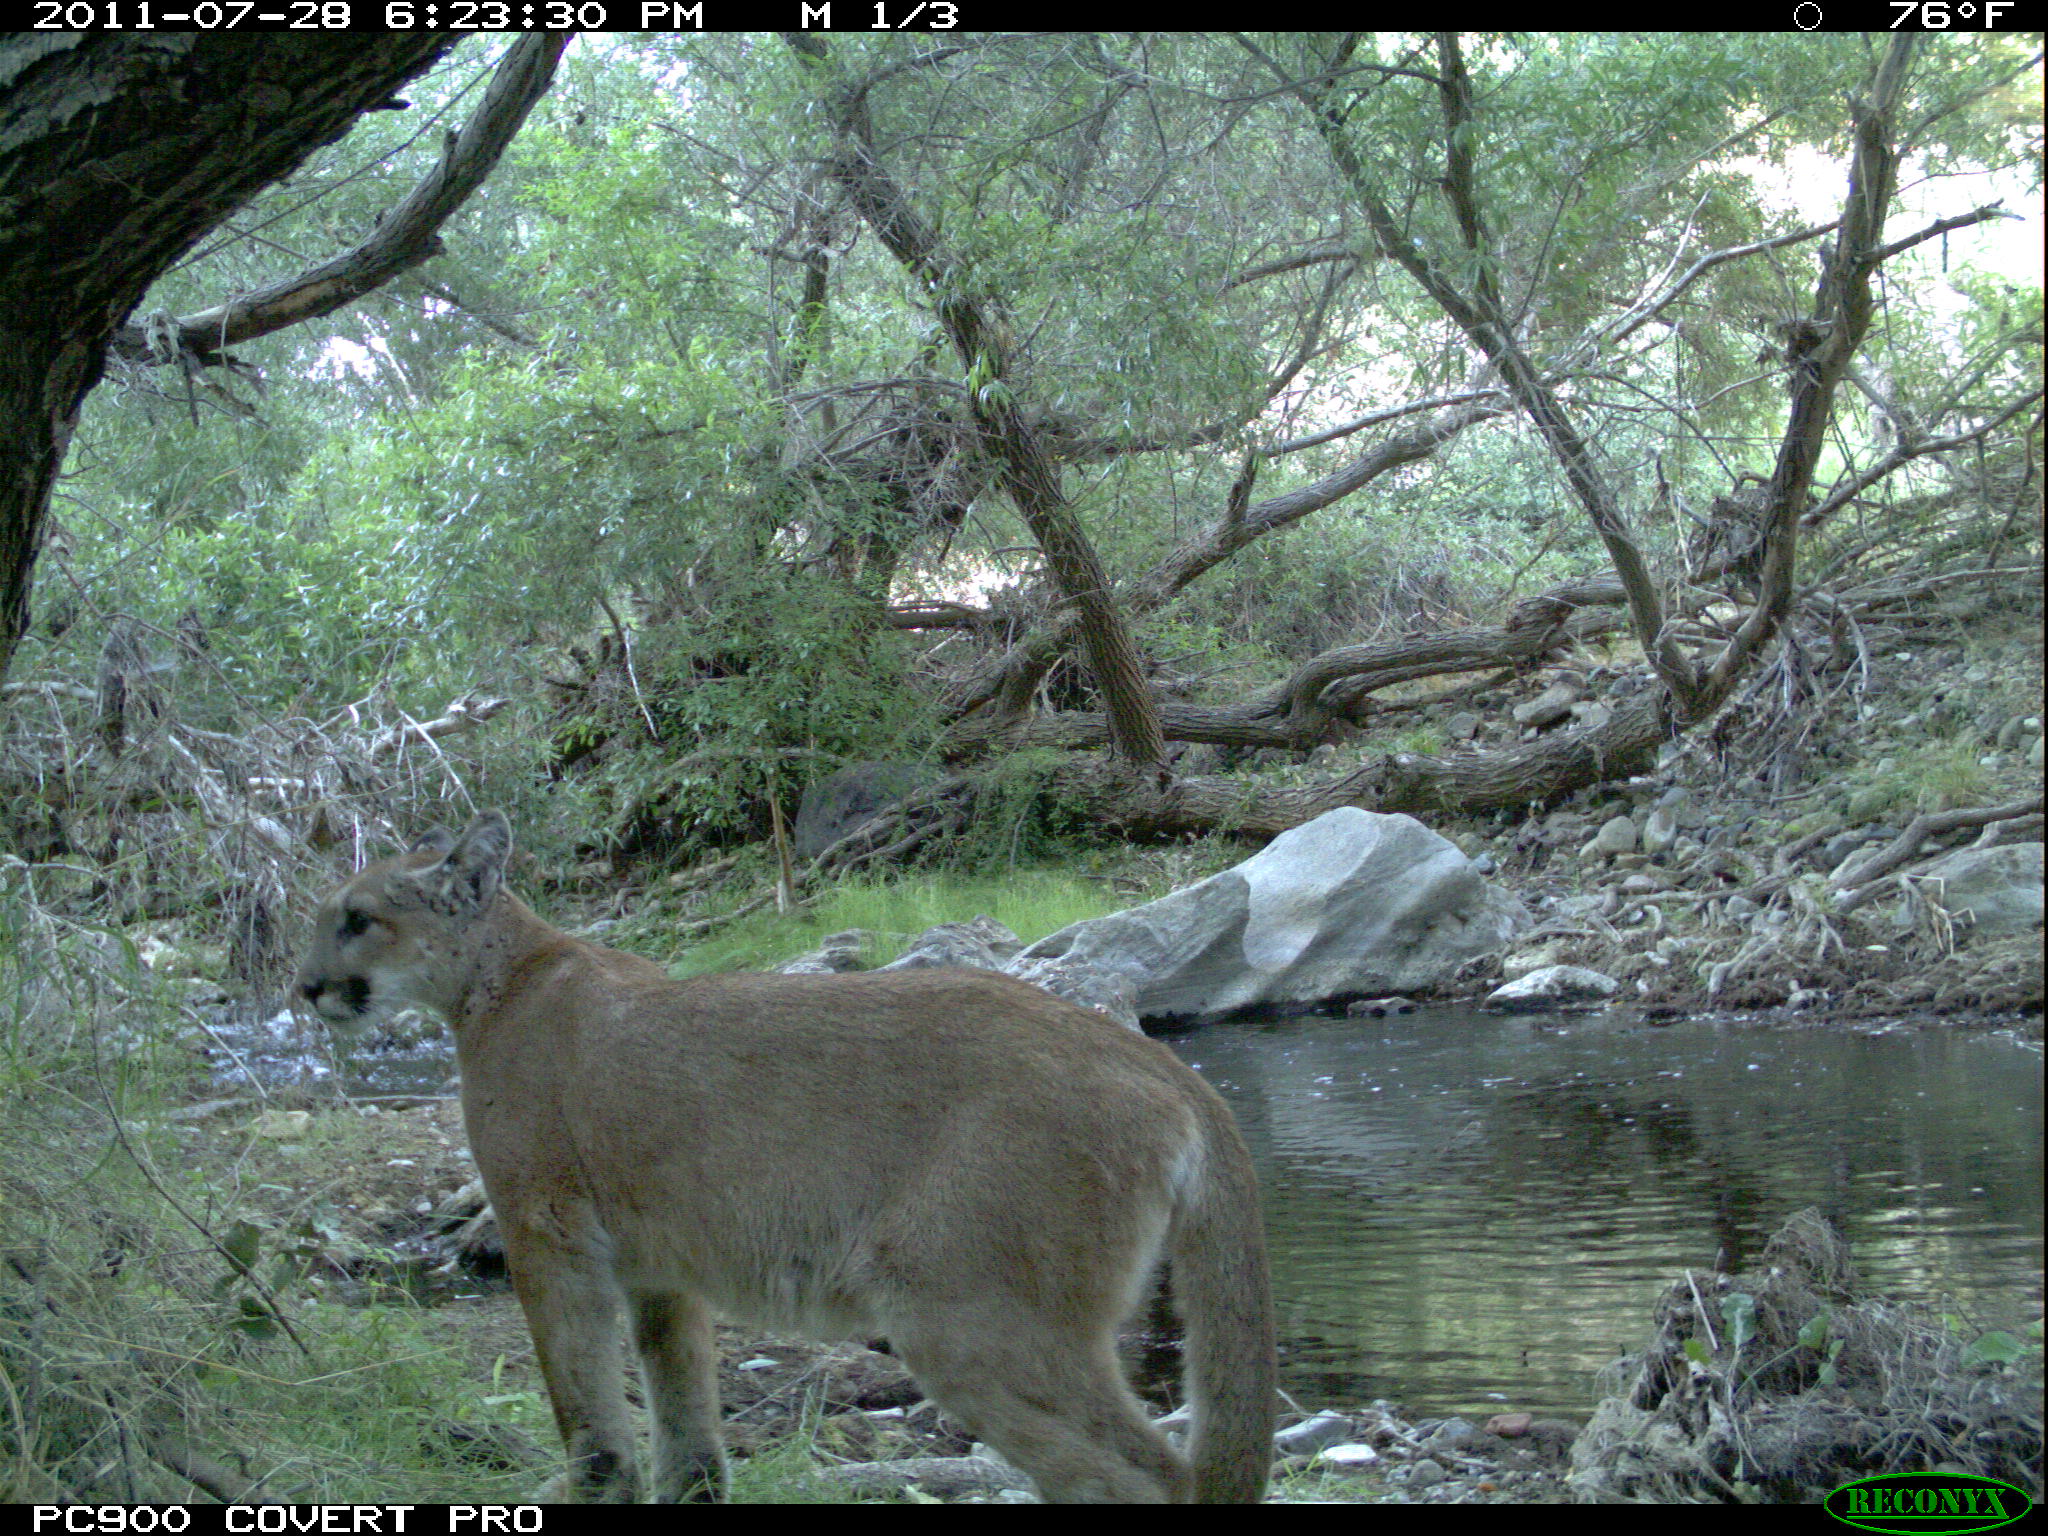 P-18 captured on remote camera shortly after becoming independent from his mother. NPS photo